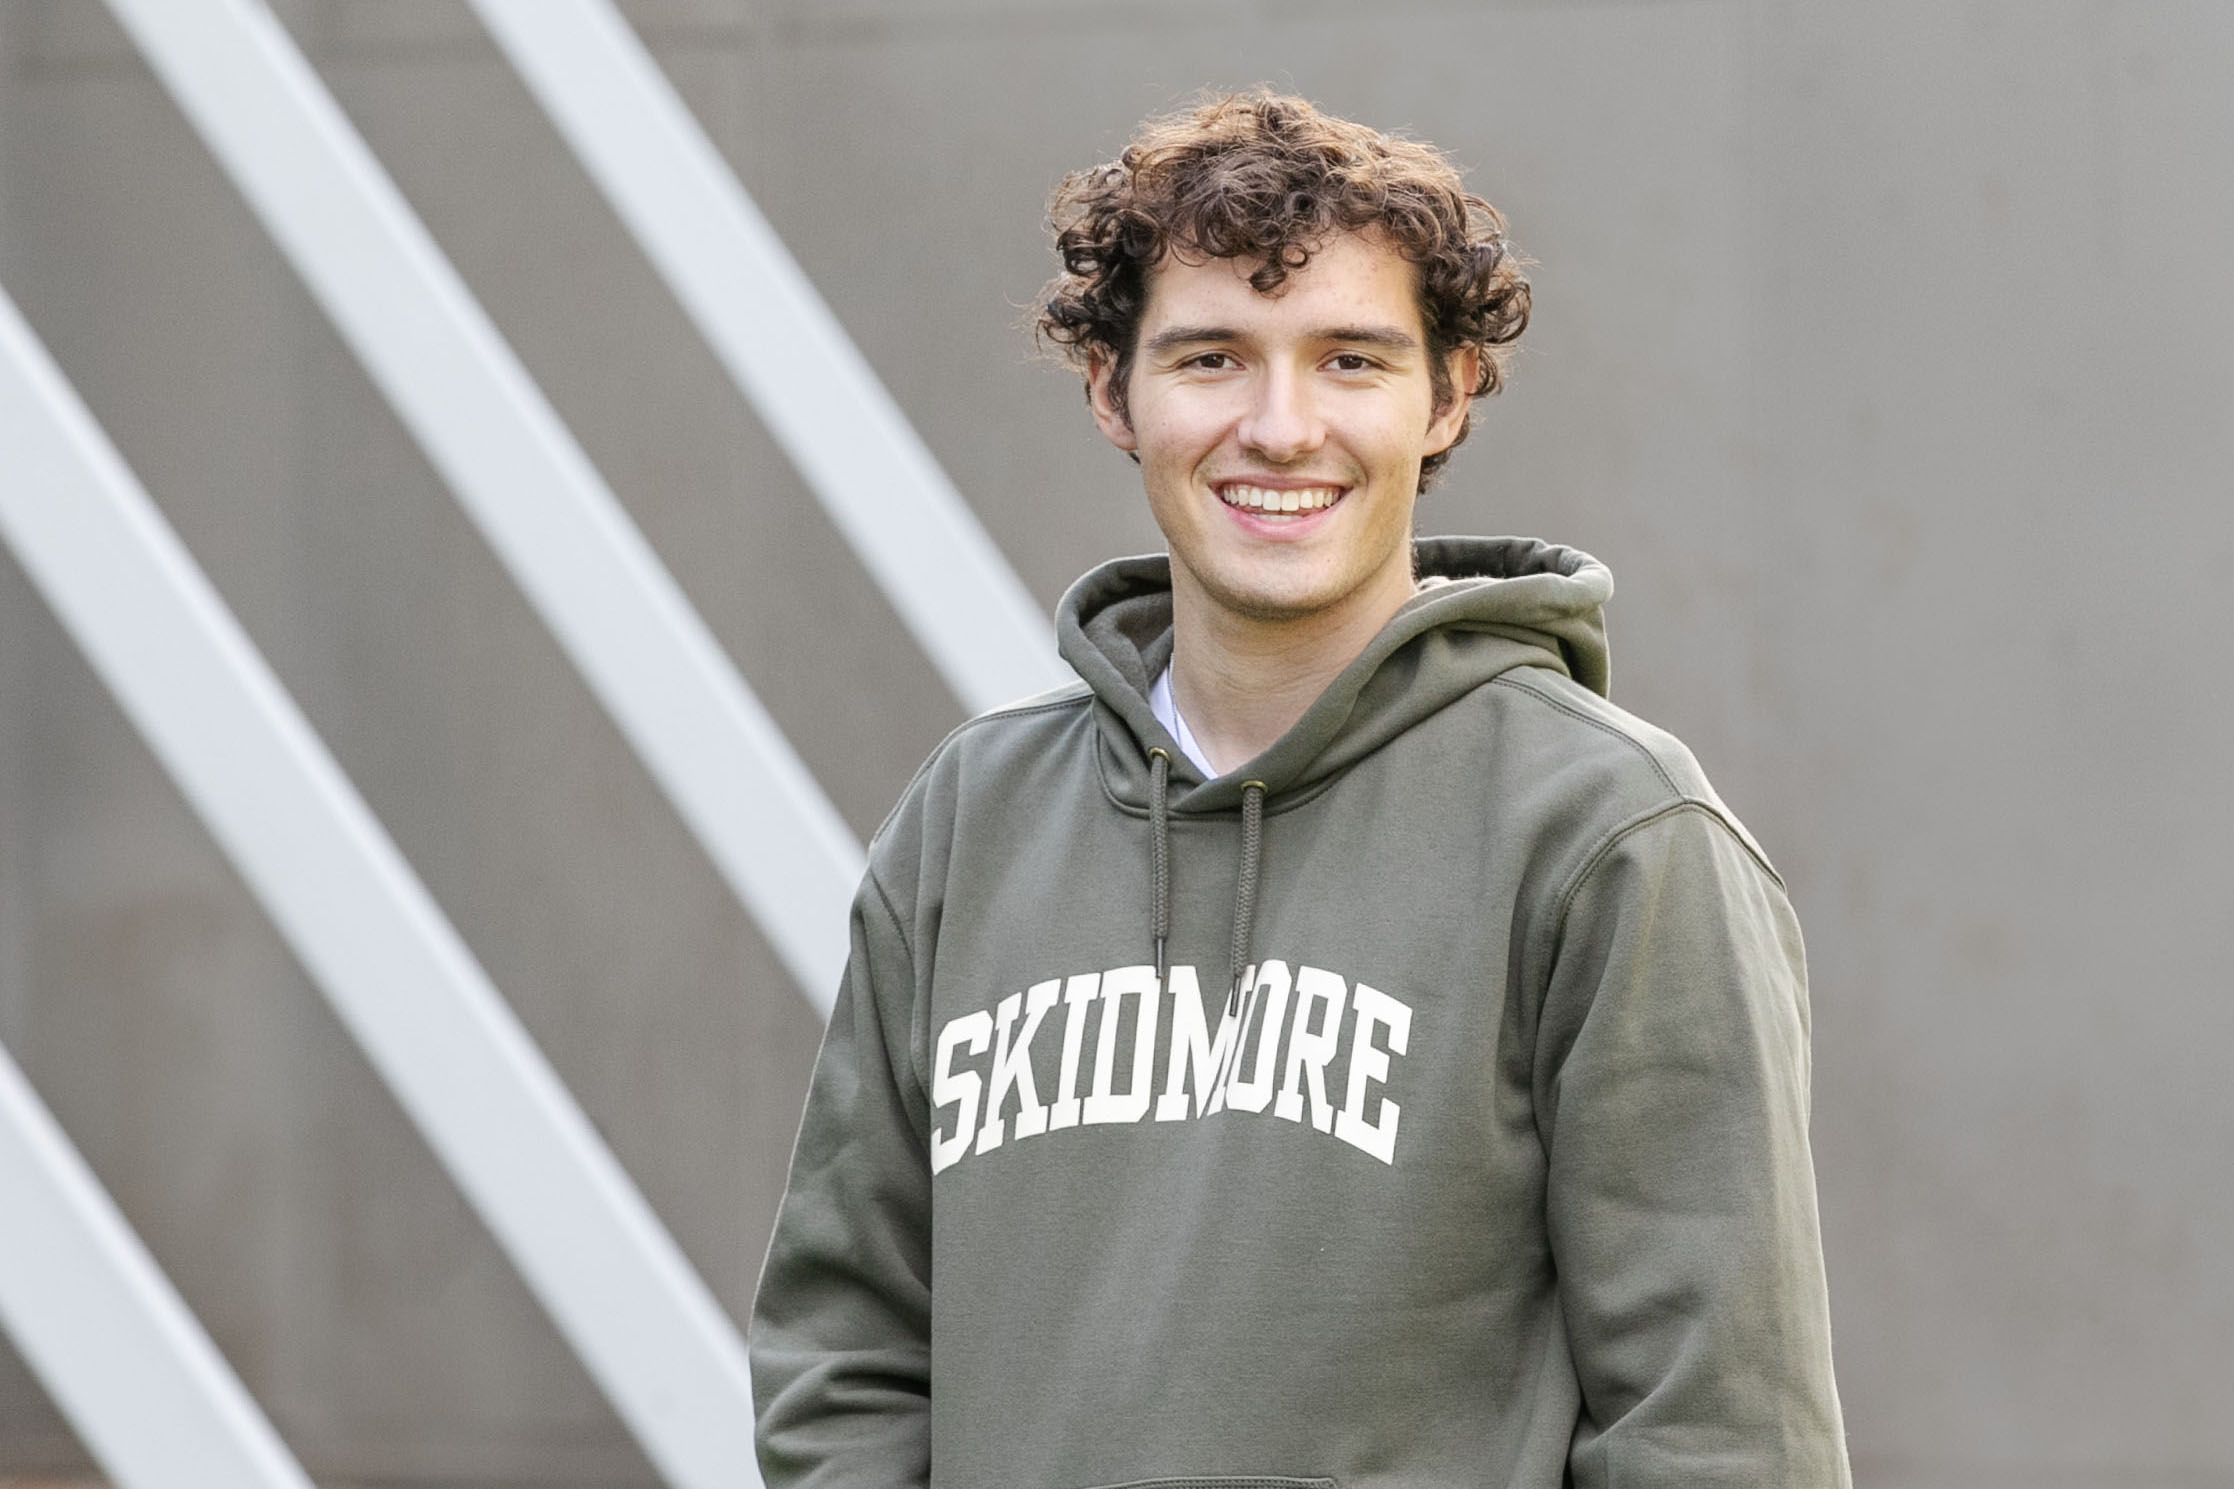 Braedon Quinlan ’24 smiles at the camera while wearing a ¼ϲʿ sweatshirt in front of the Tang Teaching Museum.